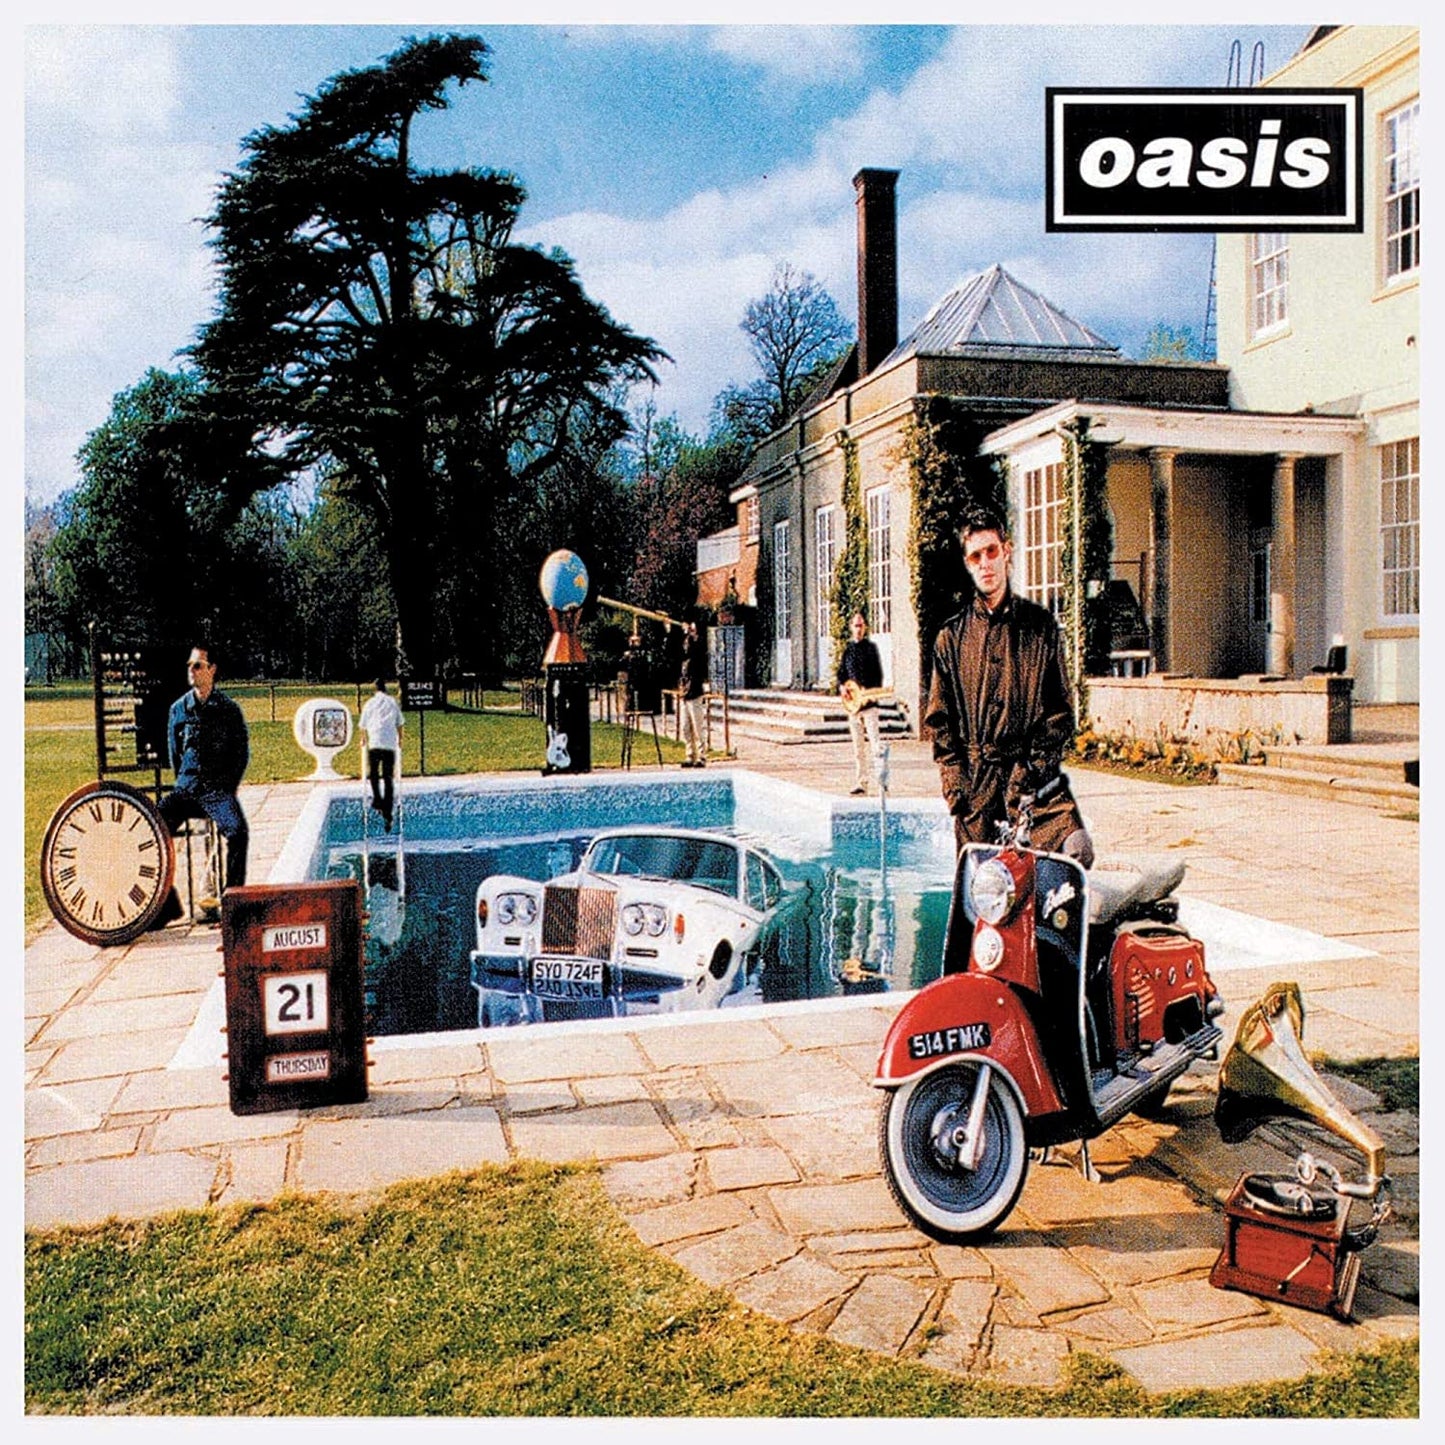 Be Here Now' is the third release on Vinyl in the Oasis series 'Chasing The Sun: 1993-1997', released on Big Brother Recordings on the 20th anniversary of the first day of the 'Be Here Now' recording sessions at Abbey Road Studios.